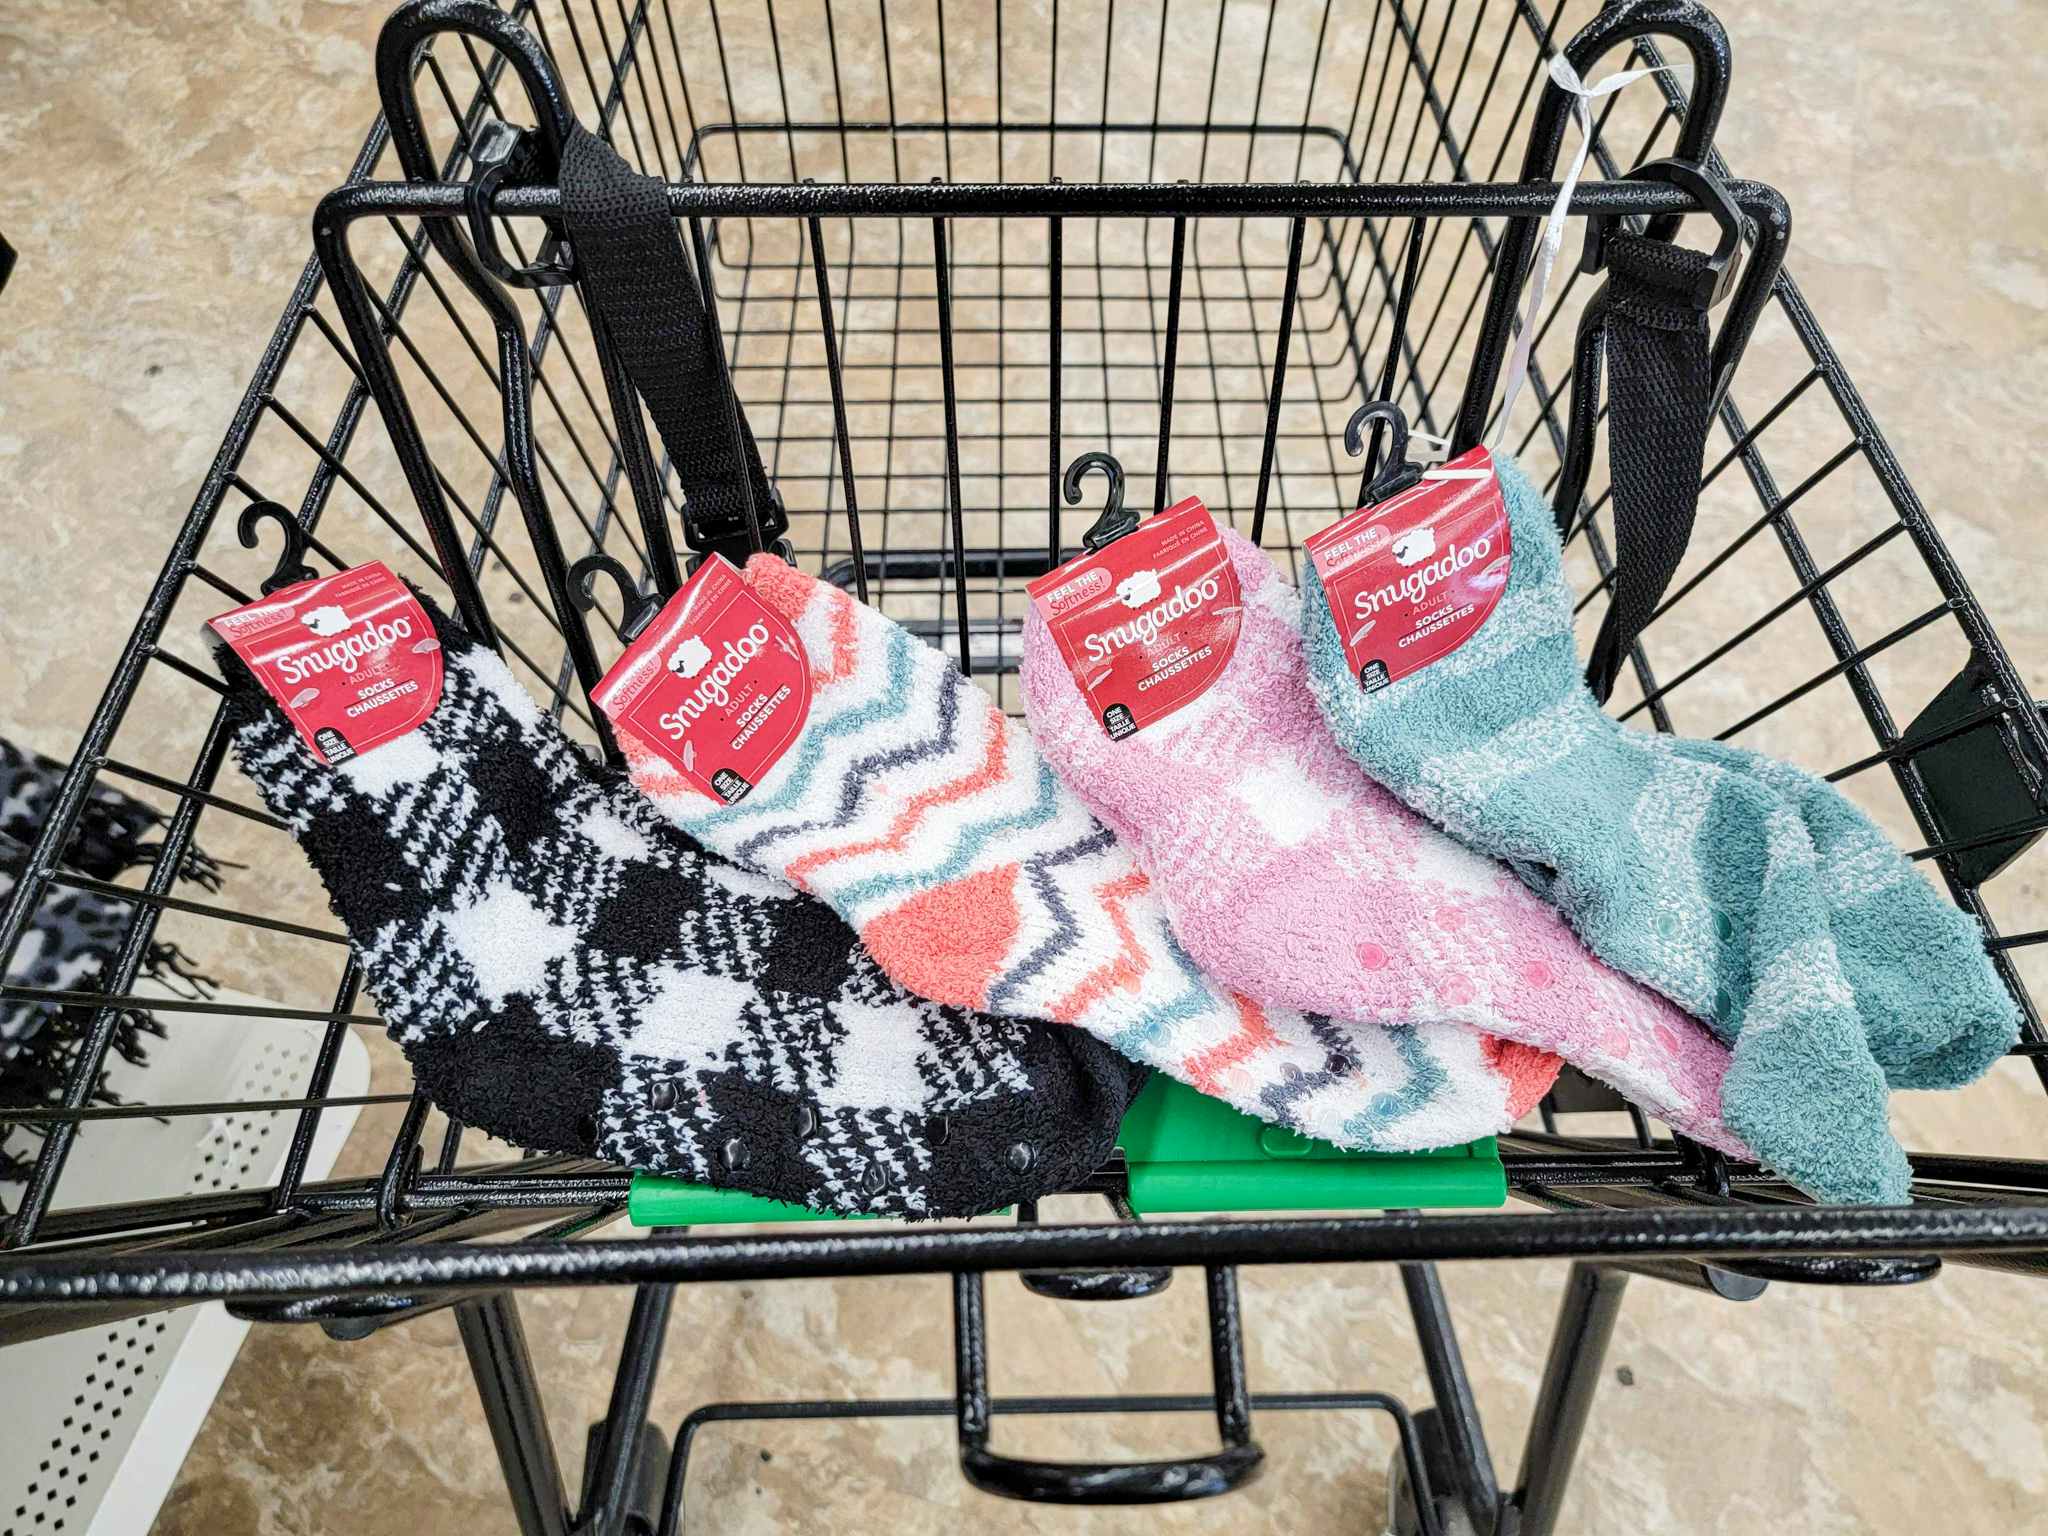 four pairs of adult fuzzy socks in a cart